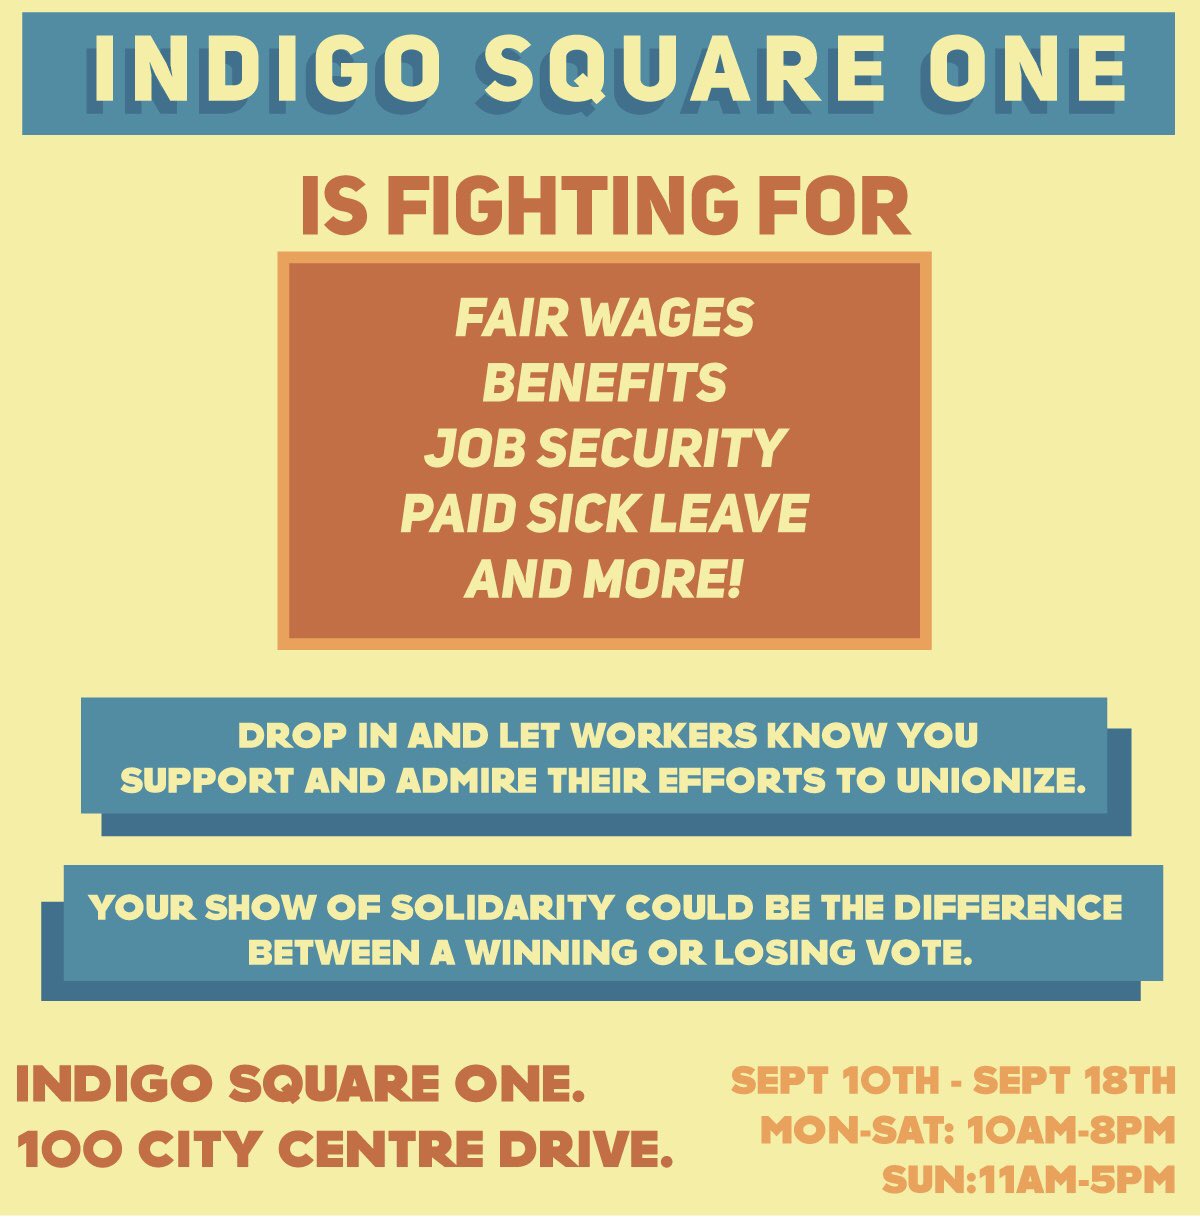 An Instagram post calling for unionization at Indigo Square One reads "Indigo Square One is fighting for fair wages, benefits, job security, paid sick leave, and more!"